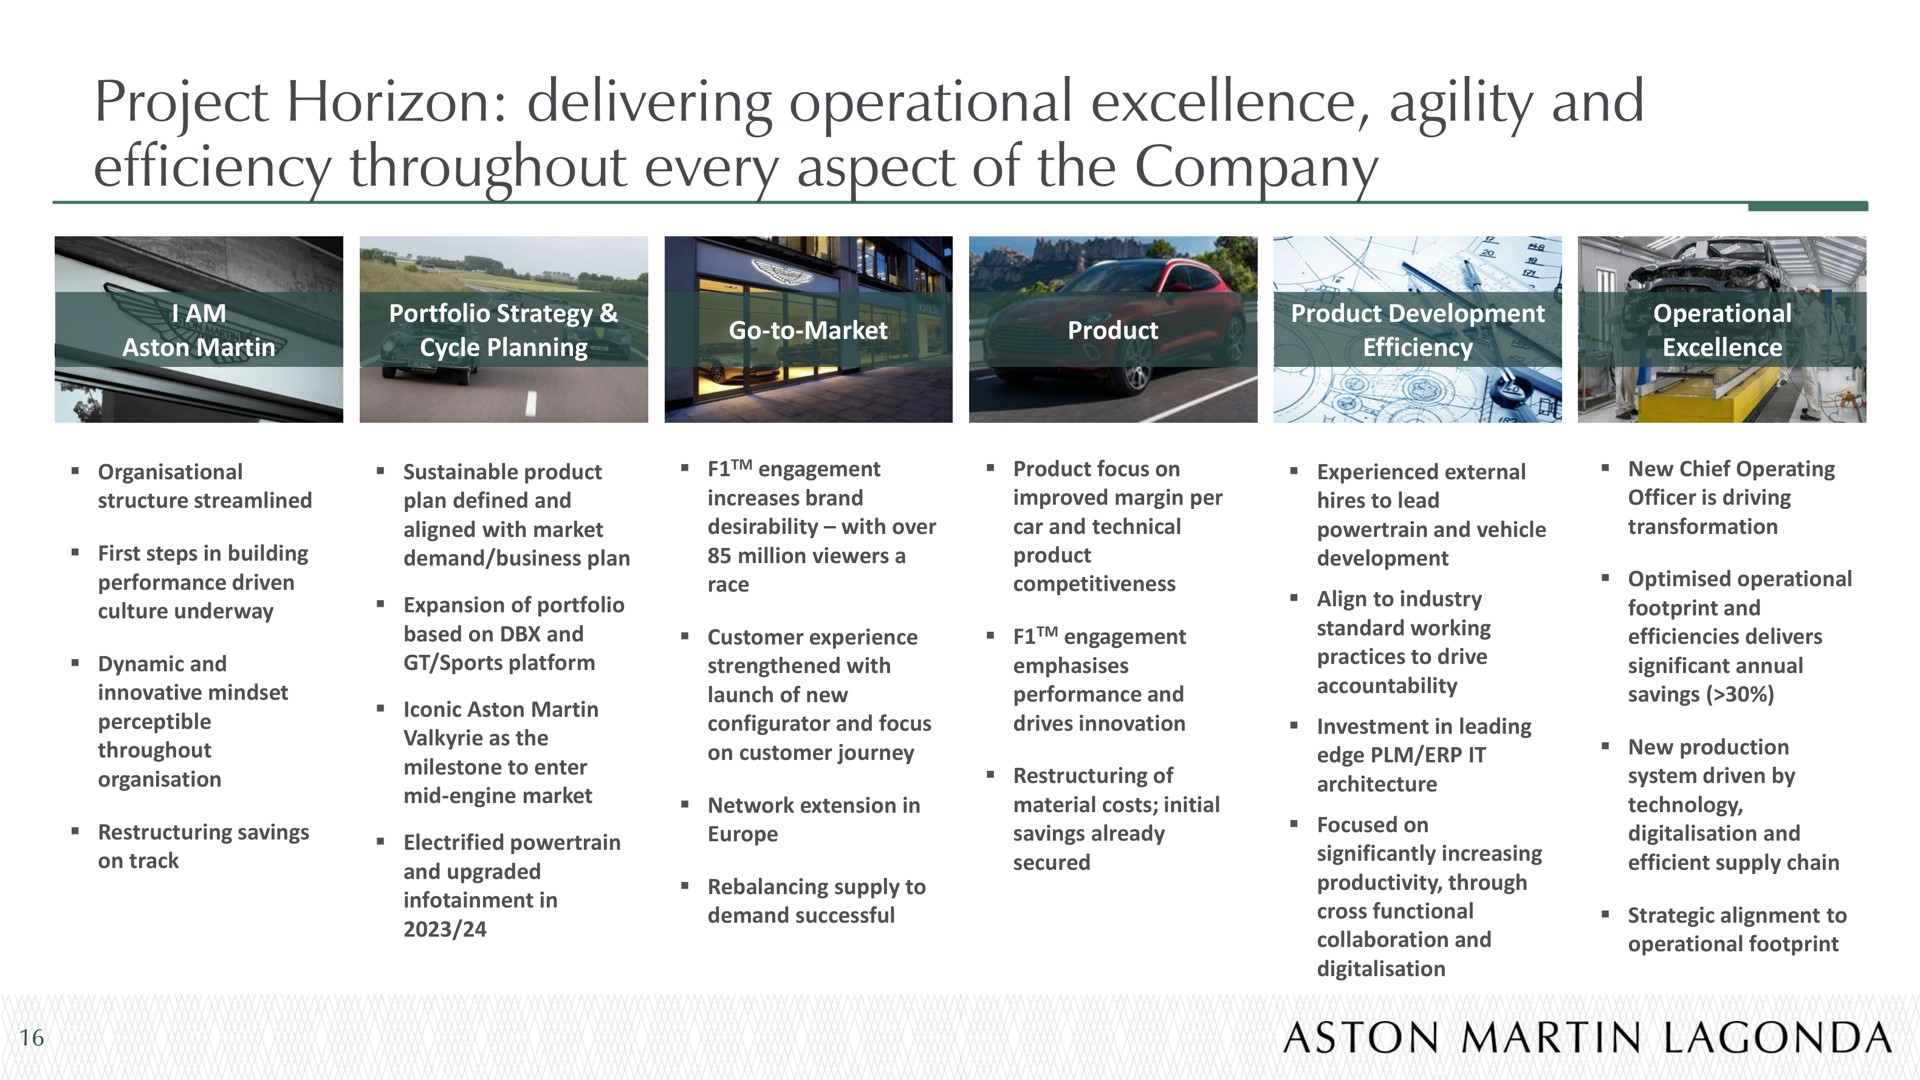 project horizon delivering operational excellence agility and efficiency throughout every aspect of the company | Aston Martin Lagonda